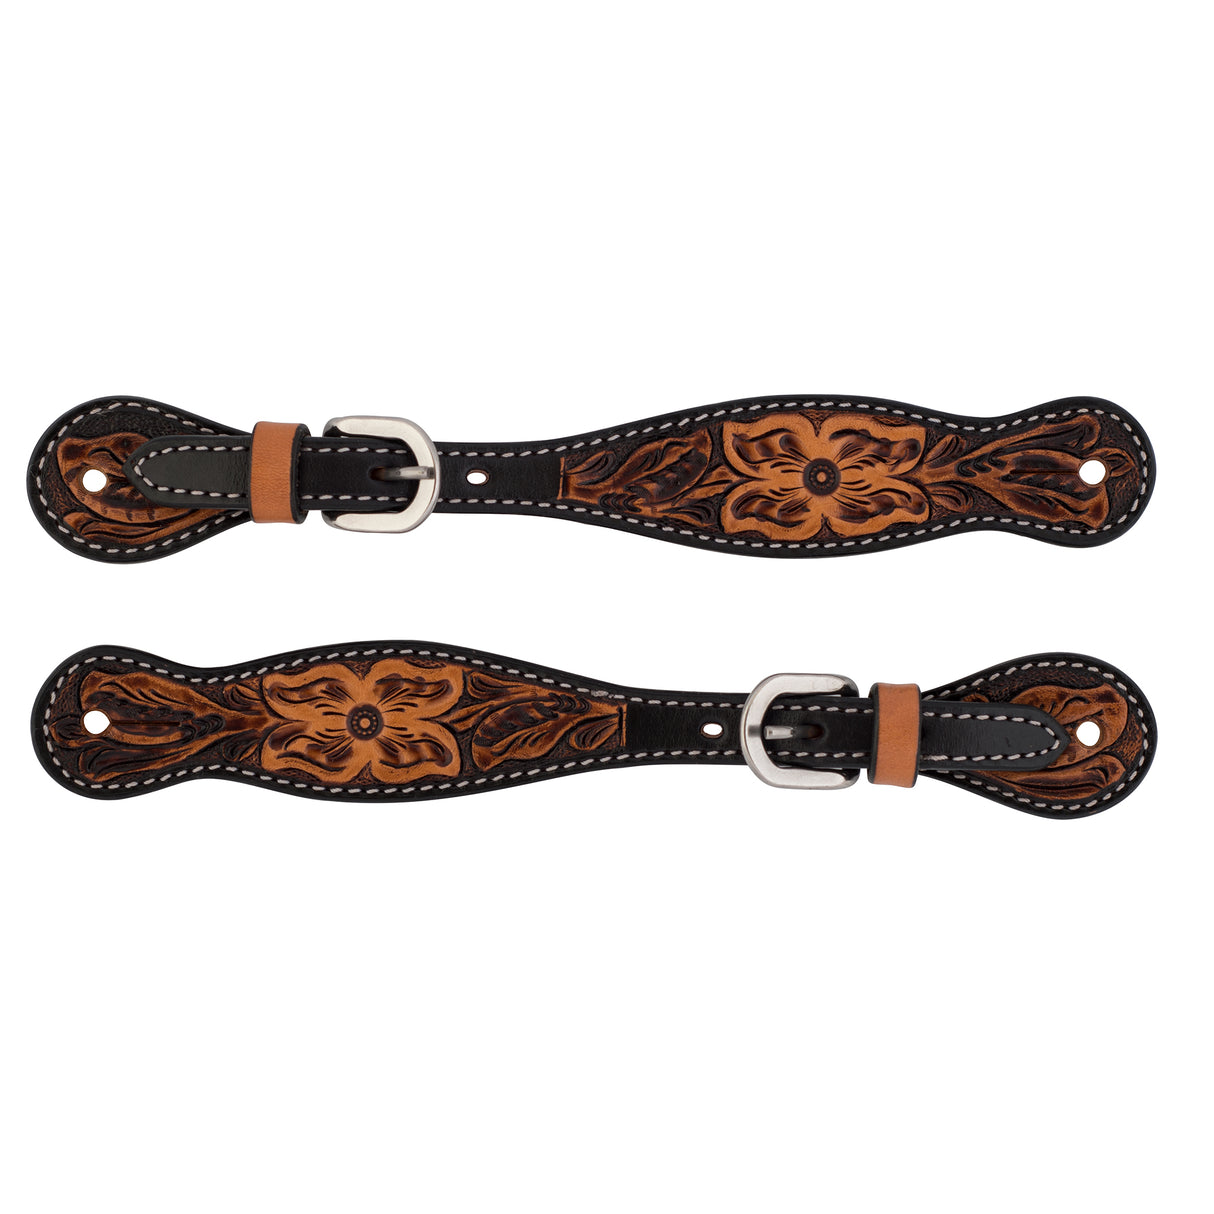 Turquoise Cross Floral Tooled Spur Straps, Ladies'